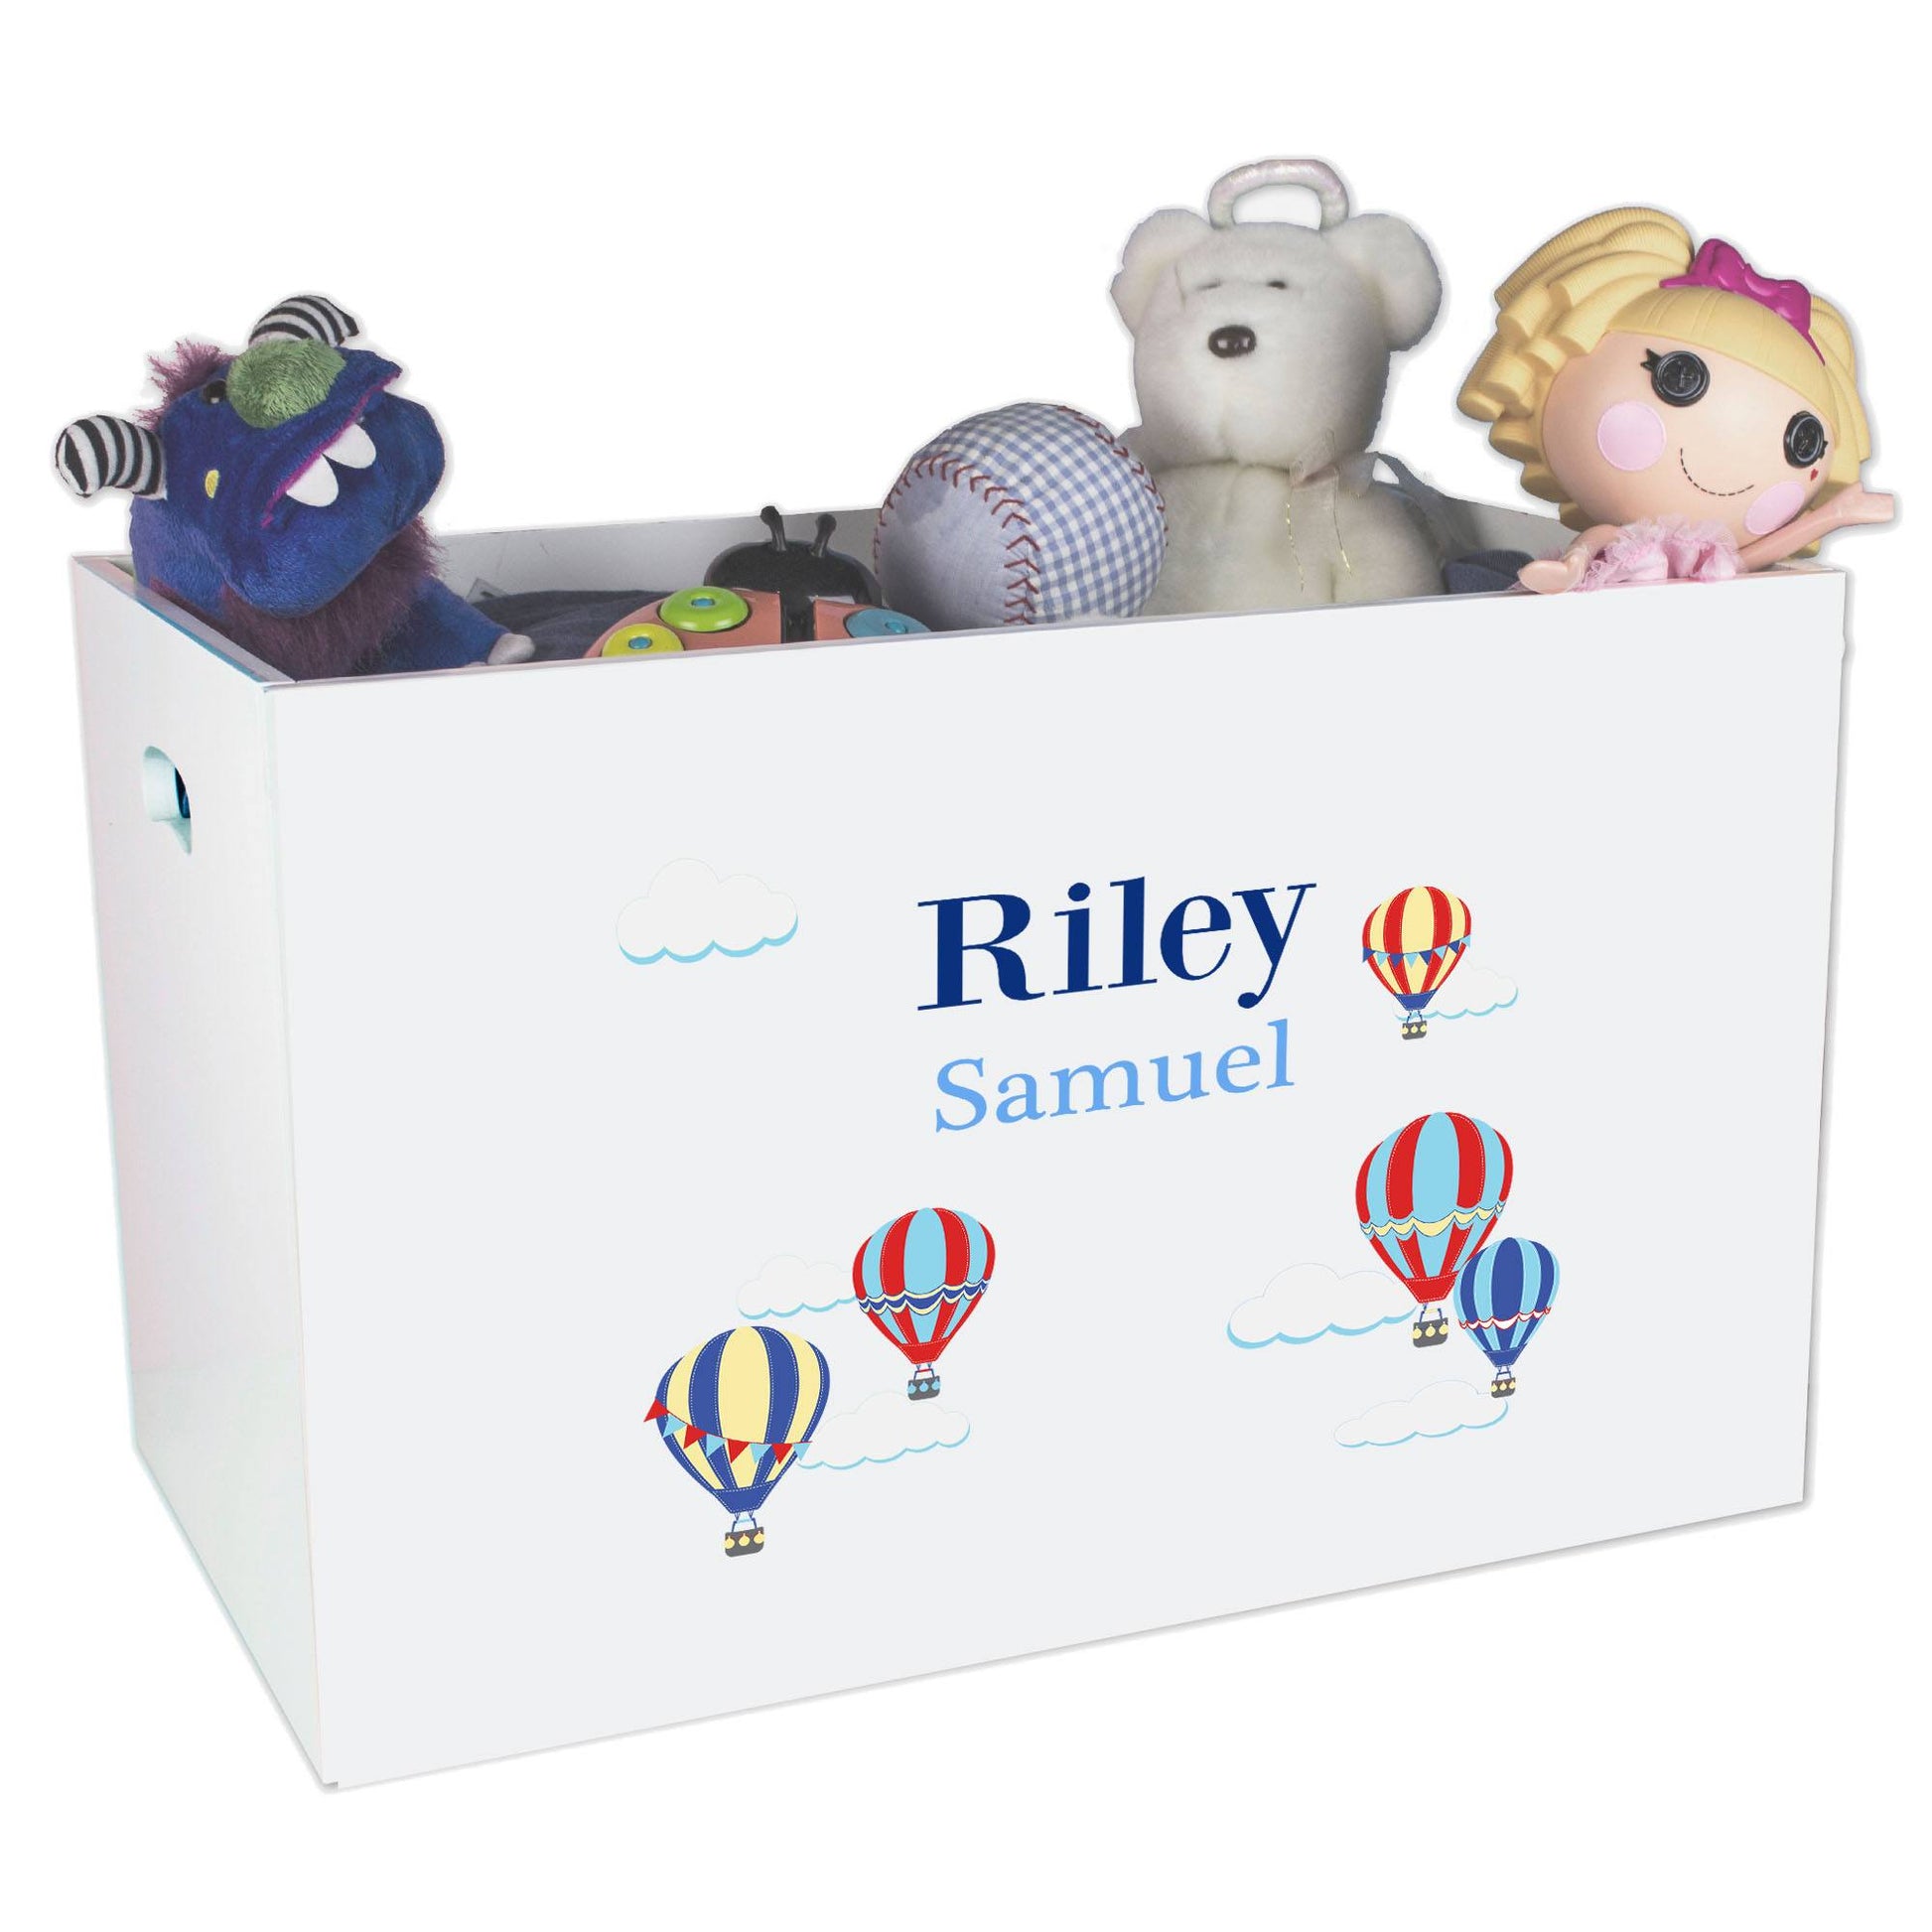 Open White Toy Box Bench with Hot Air Balloon Primary design